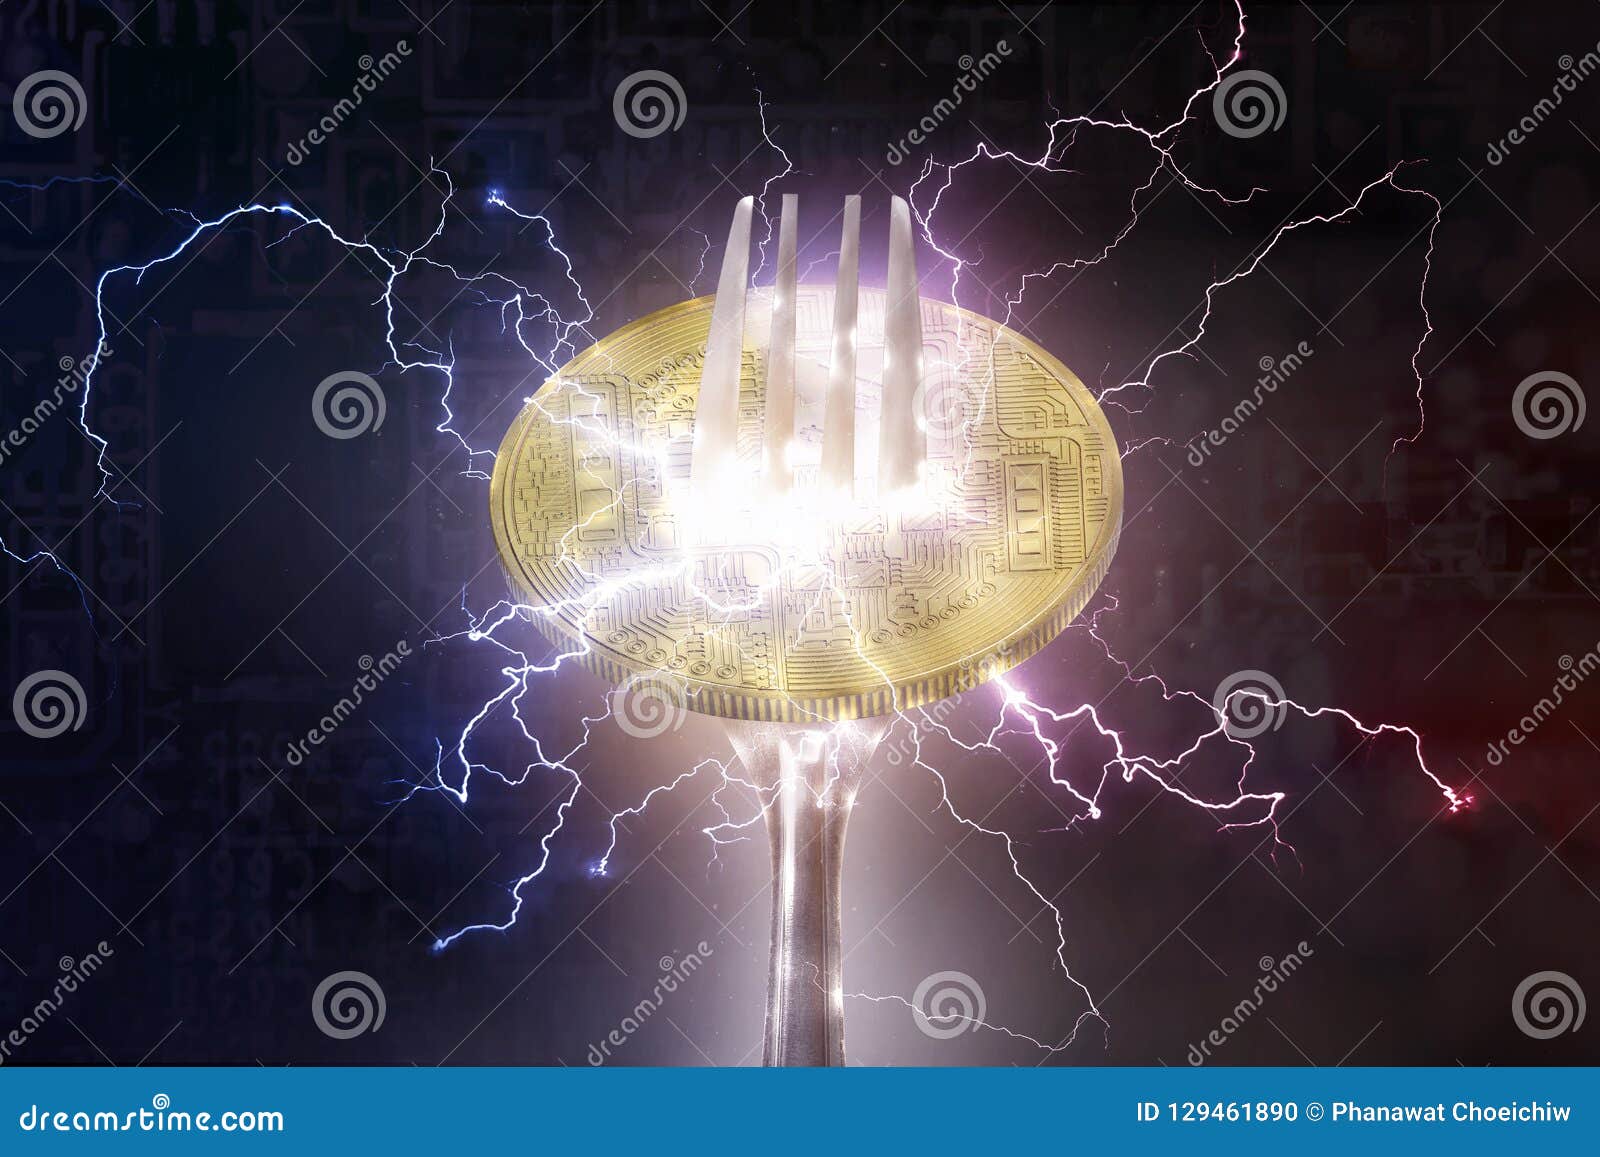 bitcoin or altcoin digital cryptocurrency hard fork change concept.